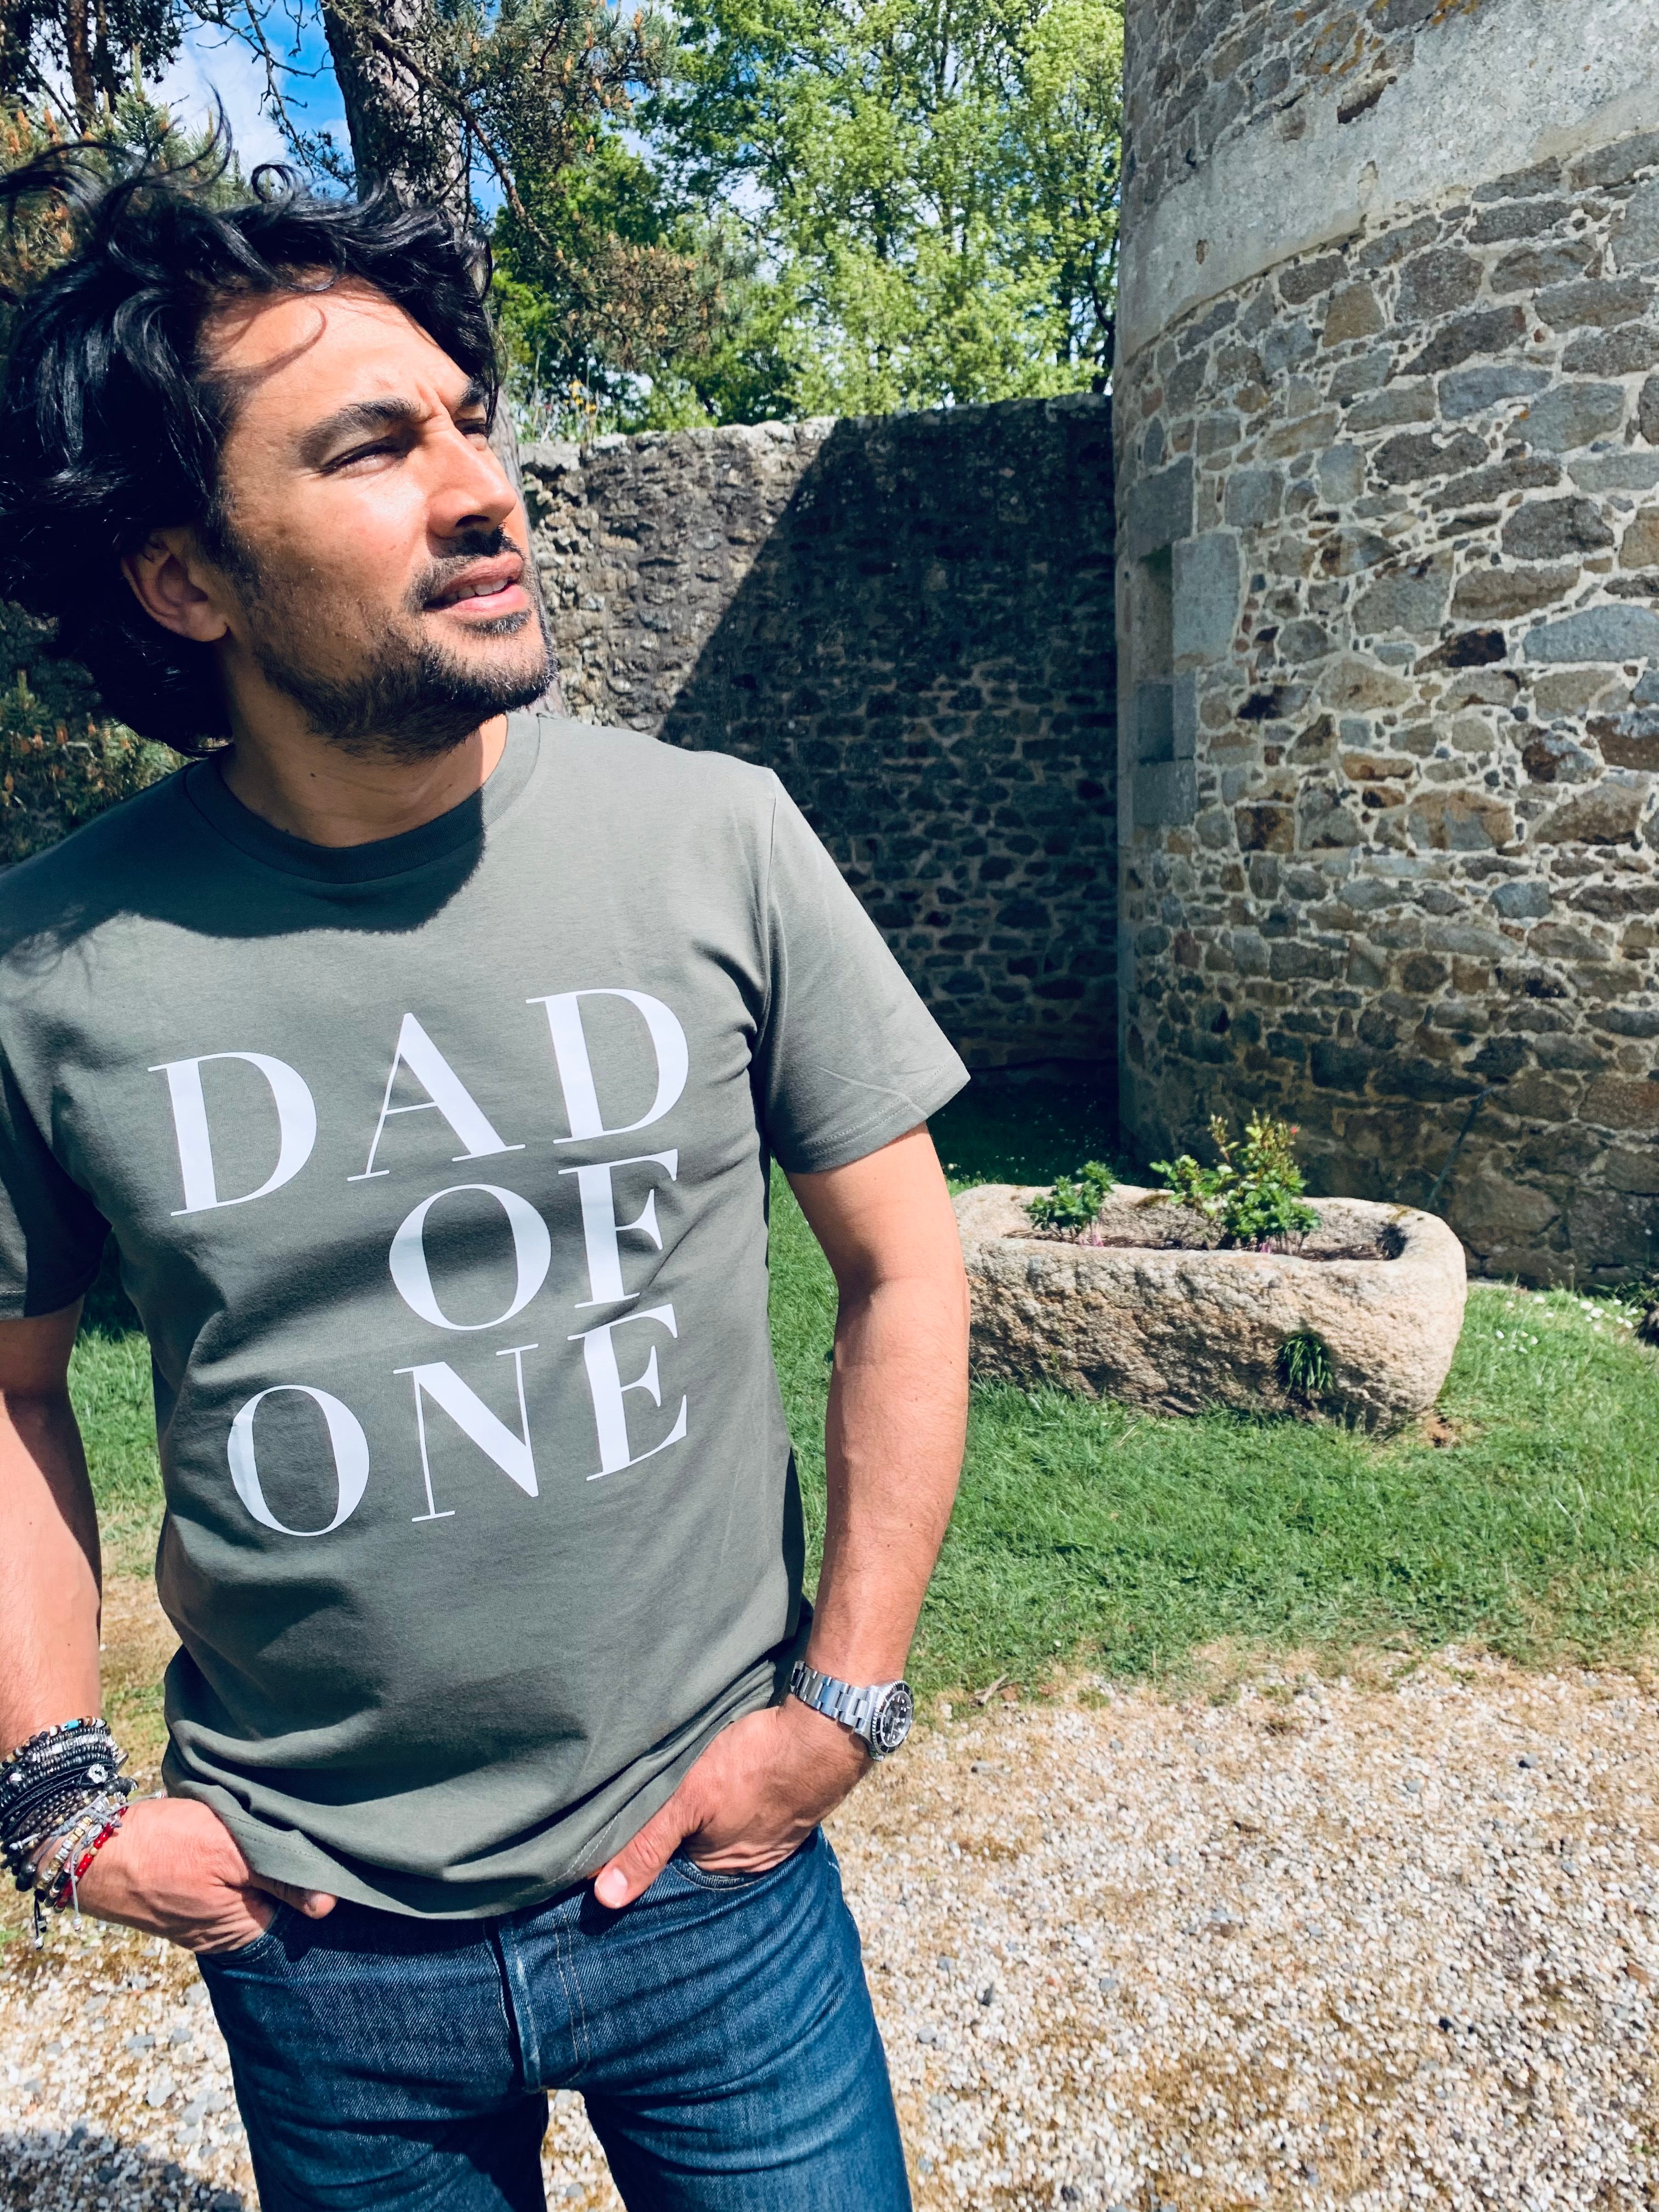 VINTAGE KHAKI T-SHIRT DAD OF ONE, DAD OF TWO, DAD OF THREE, DAD OF FOUR...